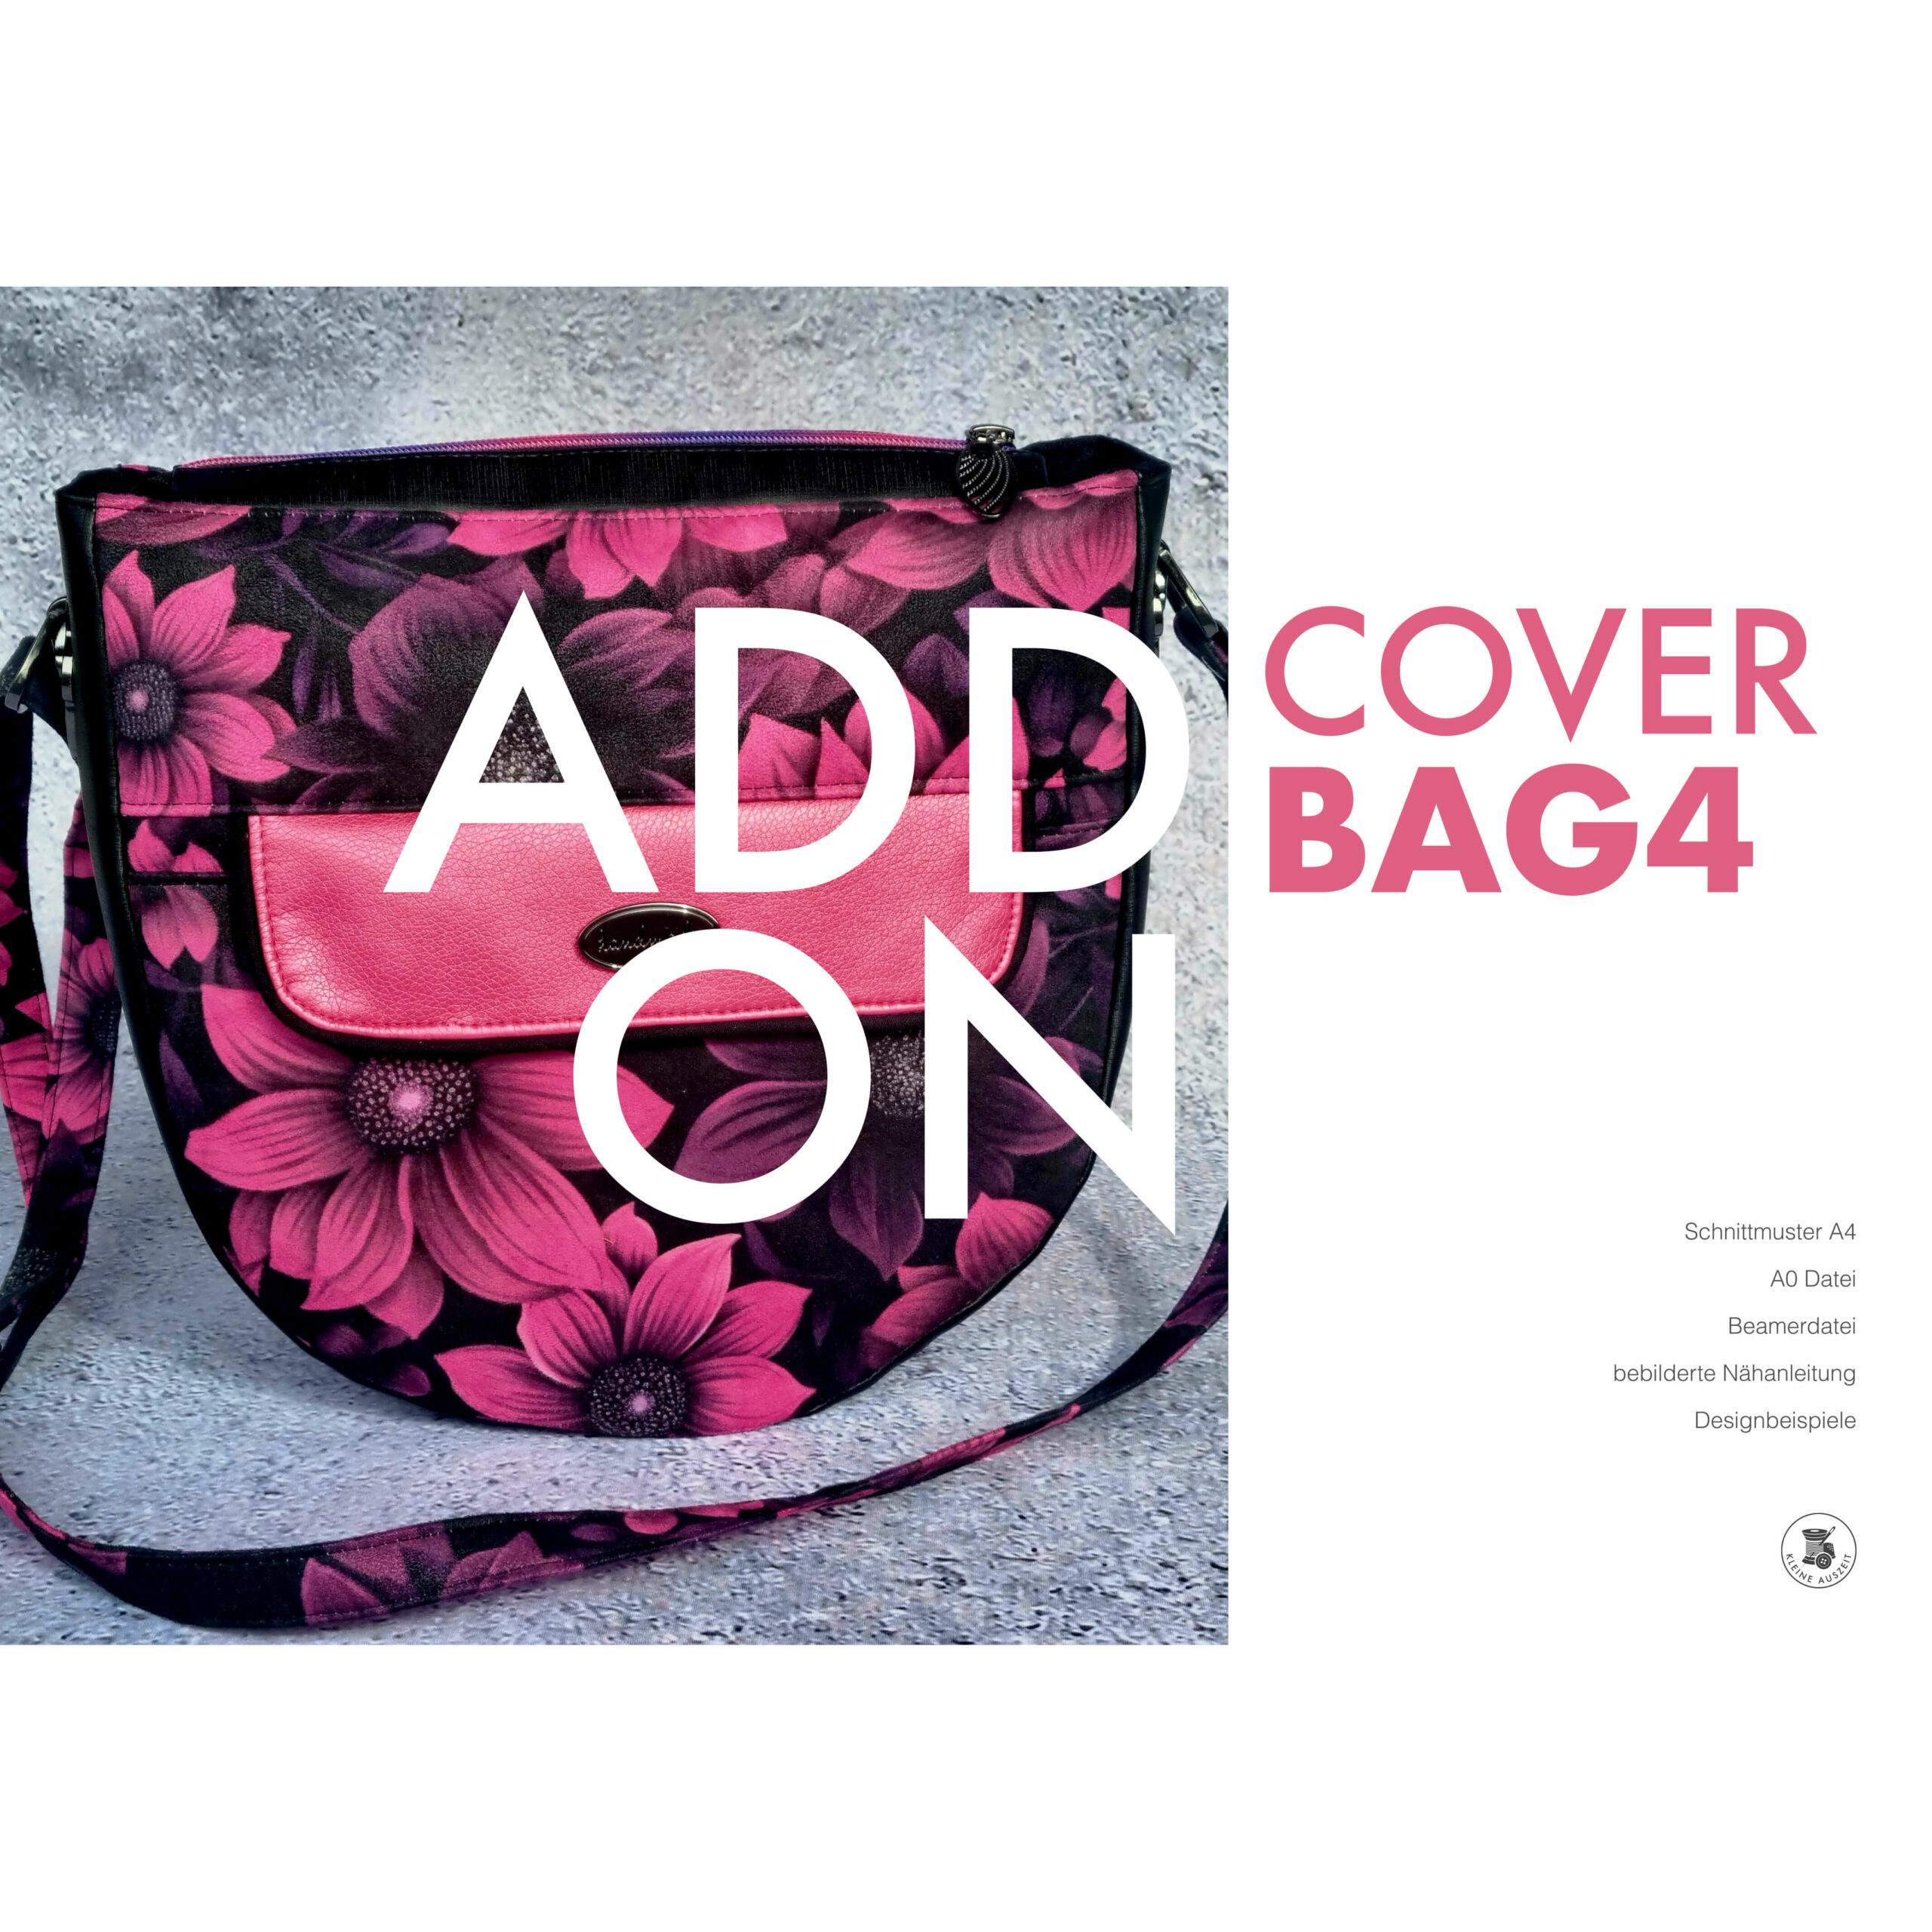 CoverBag4 Add On